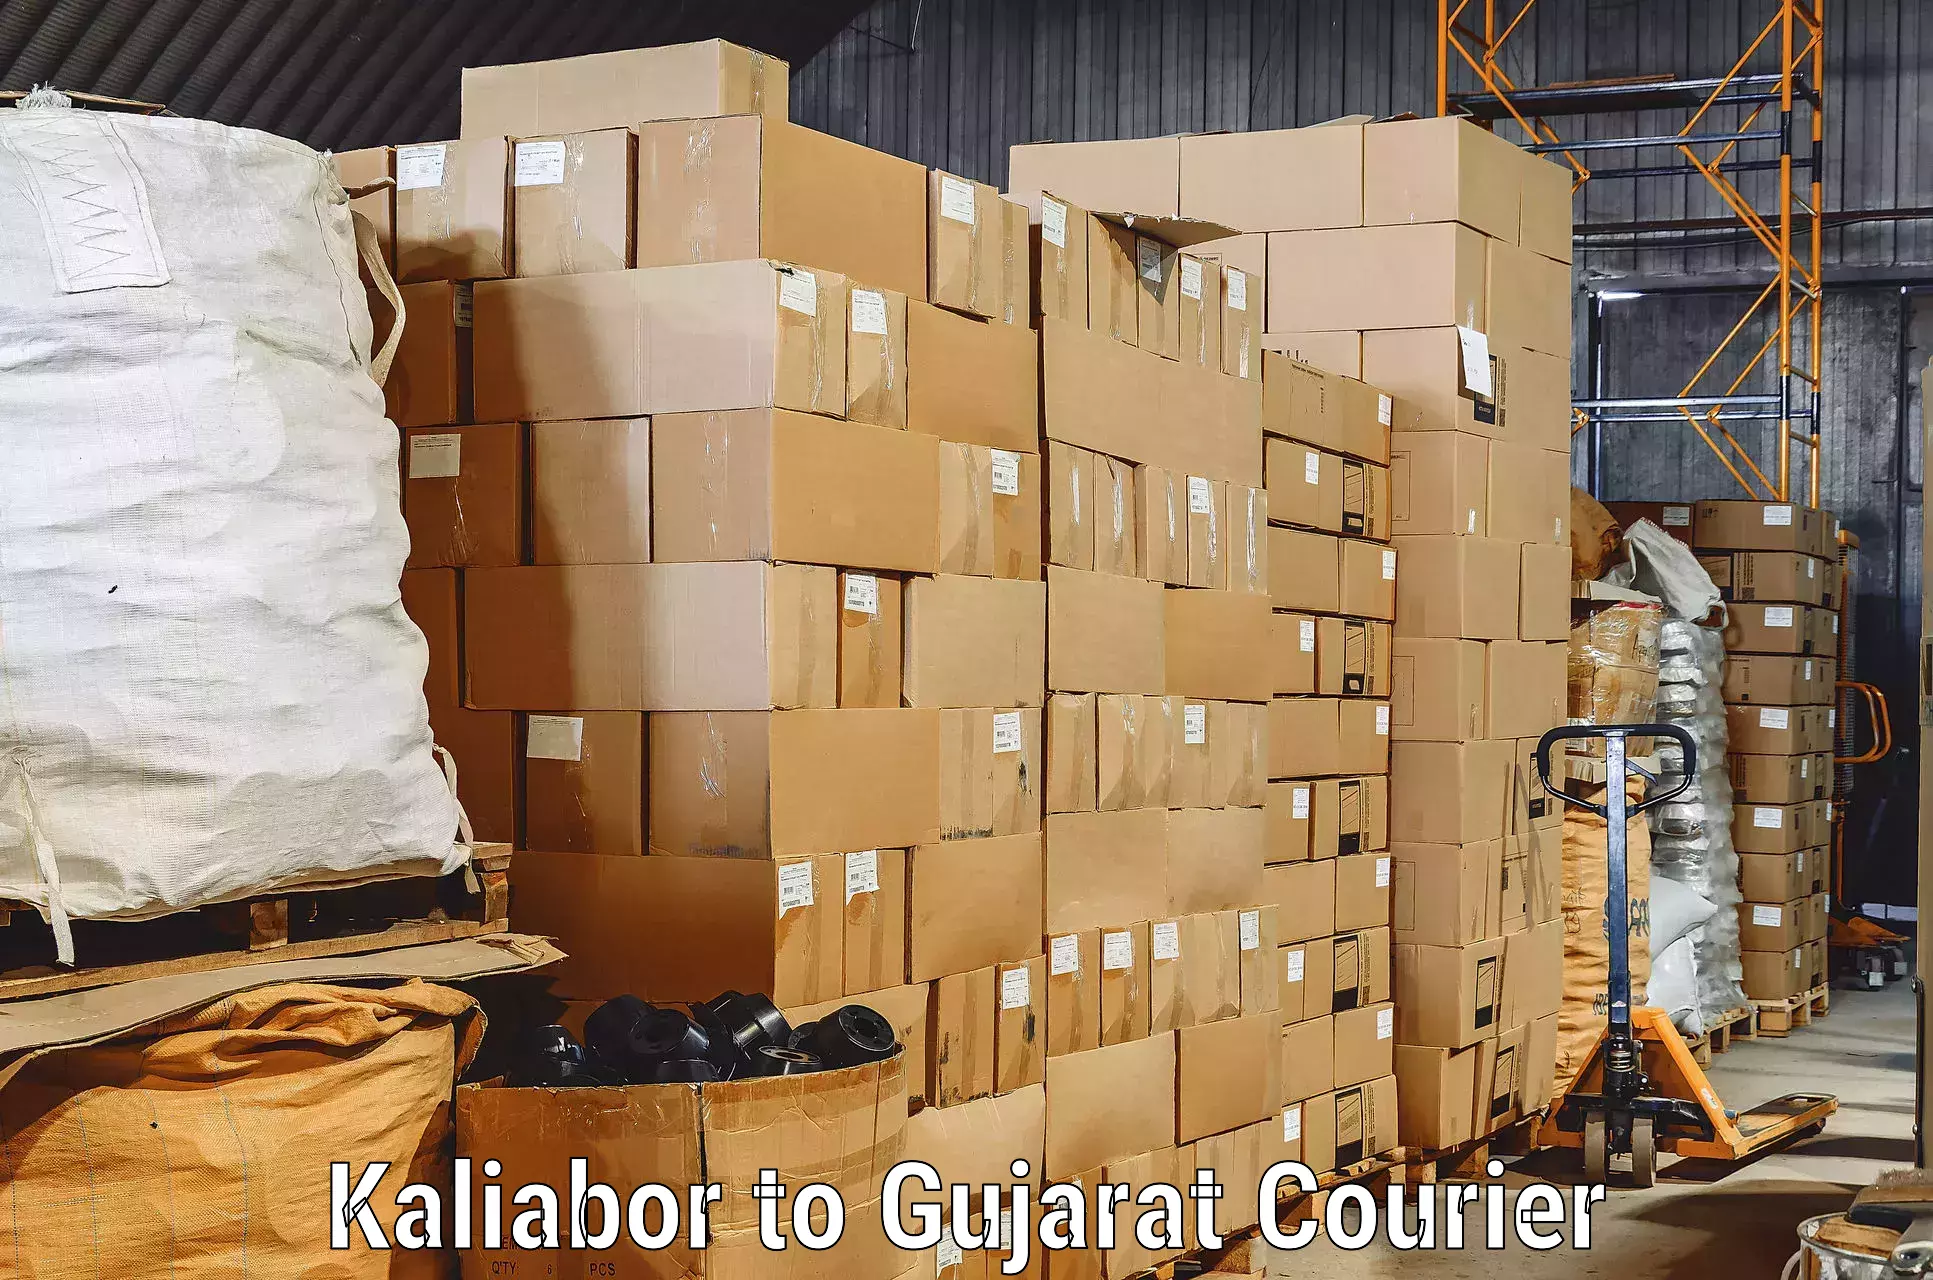 Moving and packing experts Kaliabor to Gujarat